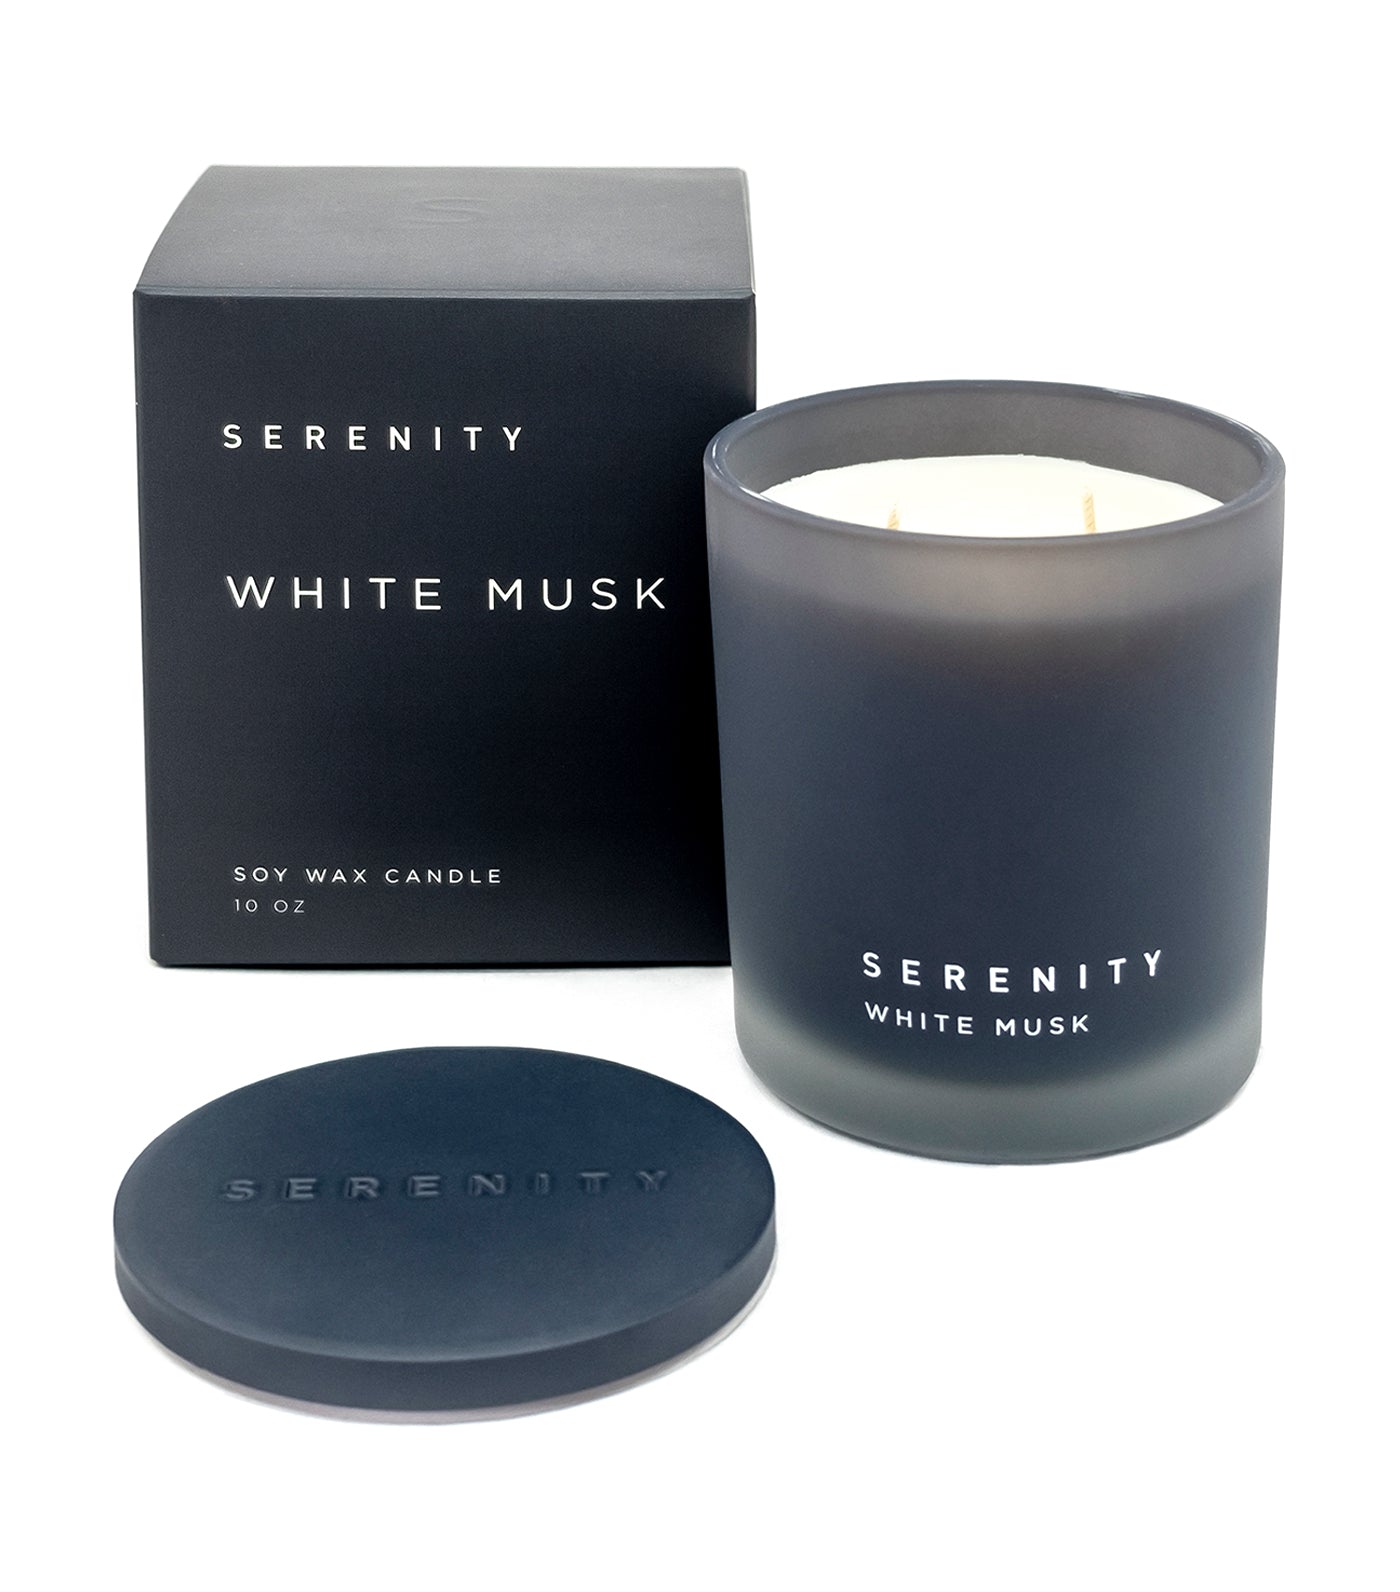 serenity white musk soy wax candle